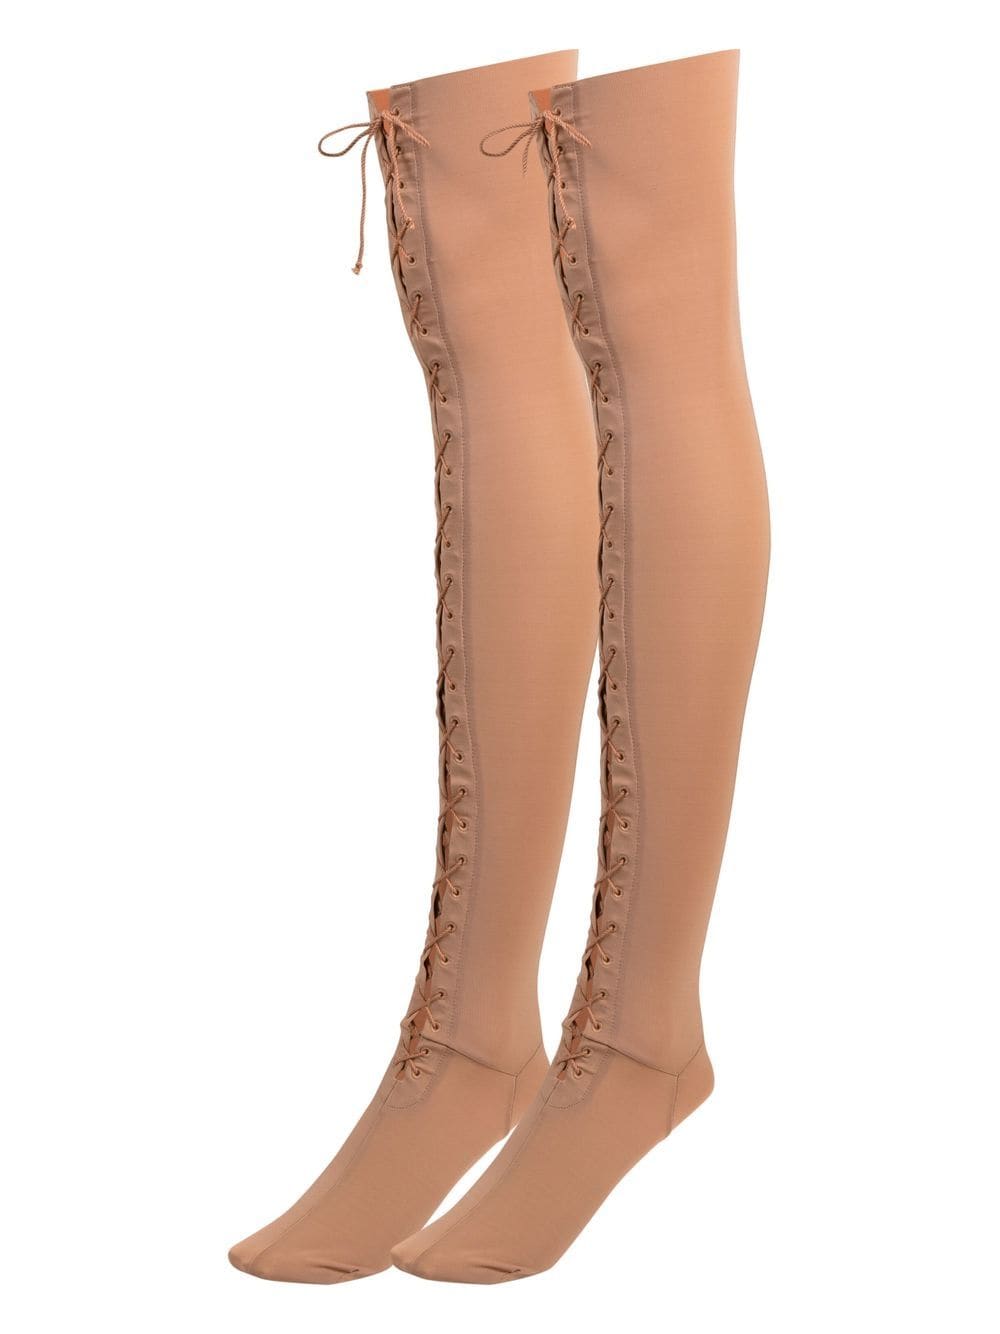 Acne Studios lace-up thigh-high socks - Beige